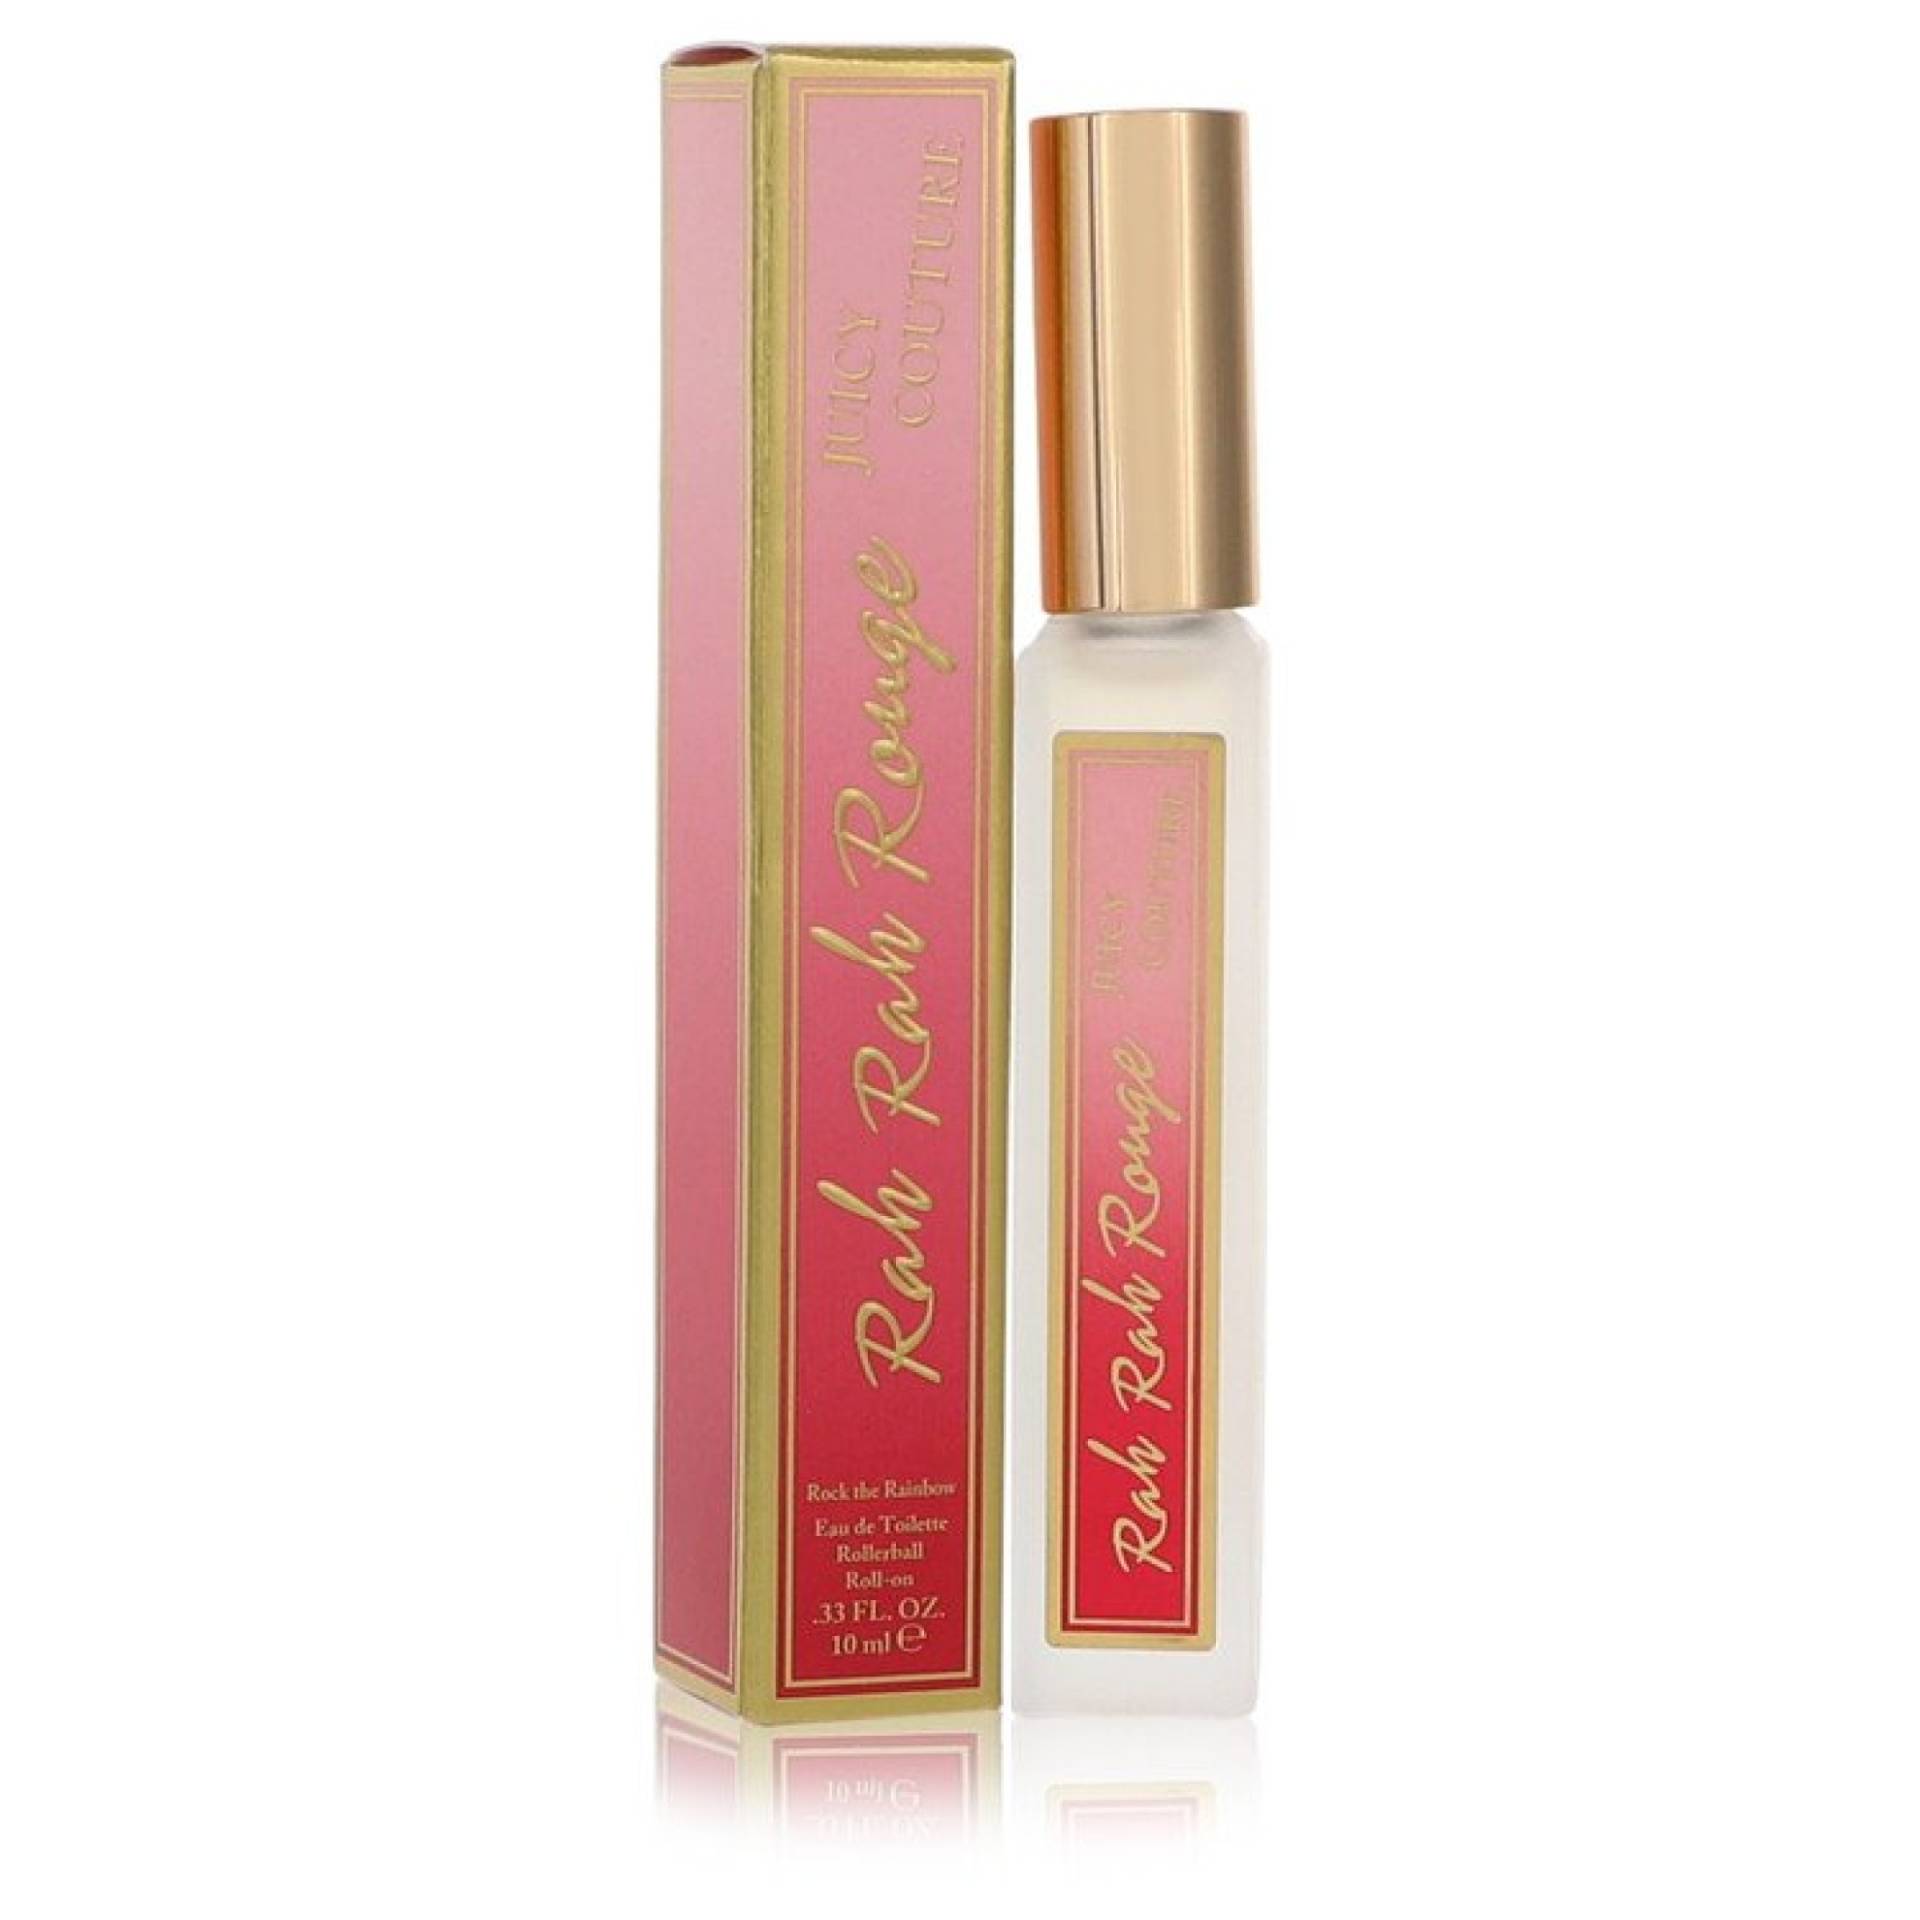 Juicy Couture Rah Rah Rouge Rock the Rainbow Mini EDT Rollerball 10 ml von Juicy Couture